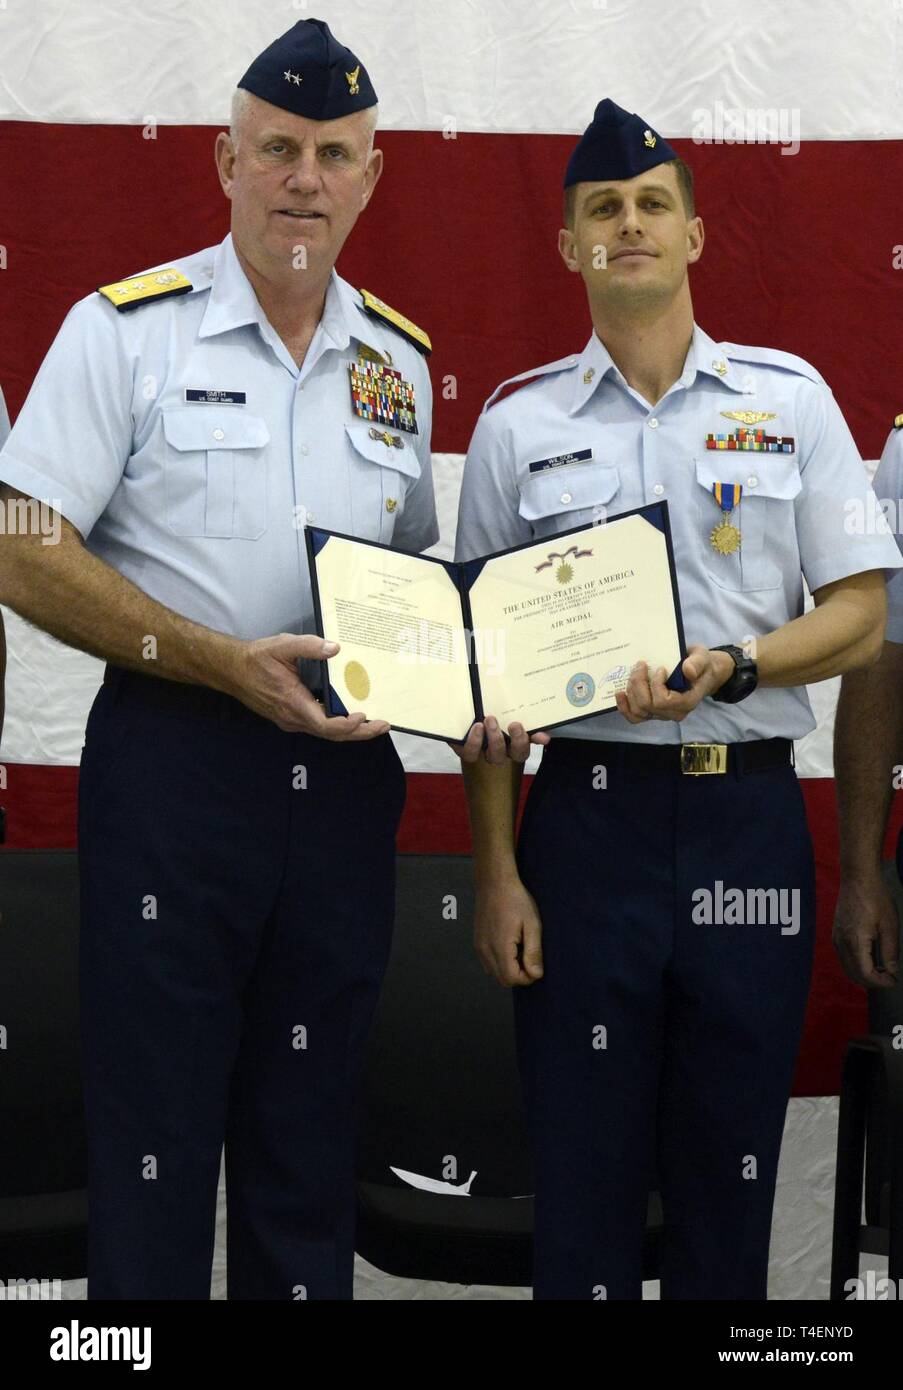 Petty Officer 2nd Class Christopher Wilson (right) displays the Air Medal award citation presented to him by Rear Adm. Keith Smith, commander of the Coast Guard’s 5th District, (left) during an award ceremony at Coast Guard Air Station Atlantic City New Jersey, April 2, 2019.    Wilson was awarded the Air Medal for meritorious achievement in actions taken during his deployment to Hurricane Harvey.    Coast Guard Stock Photo